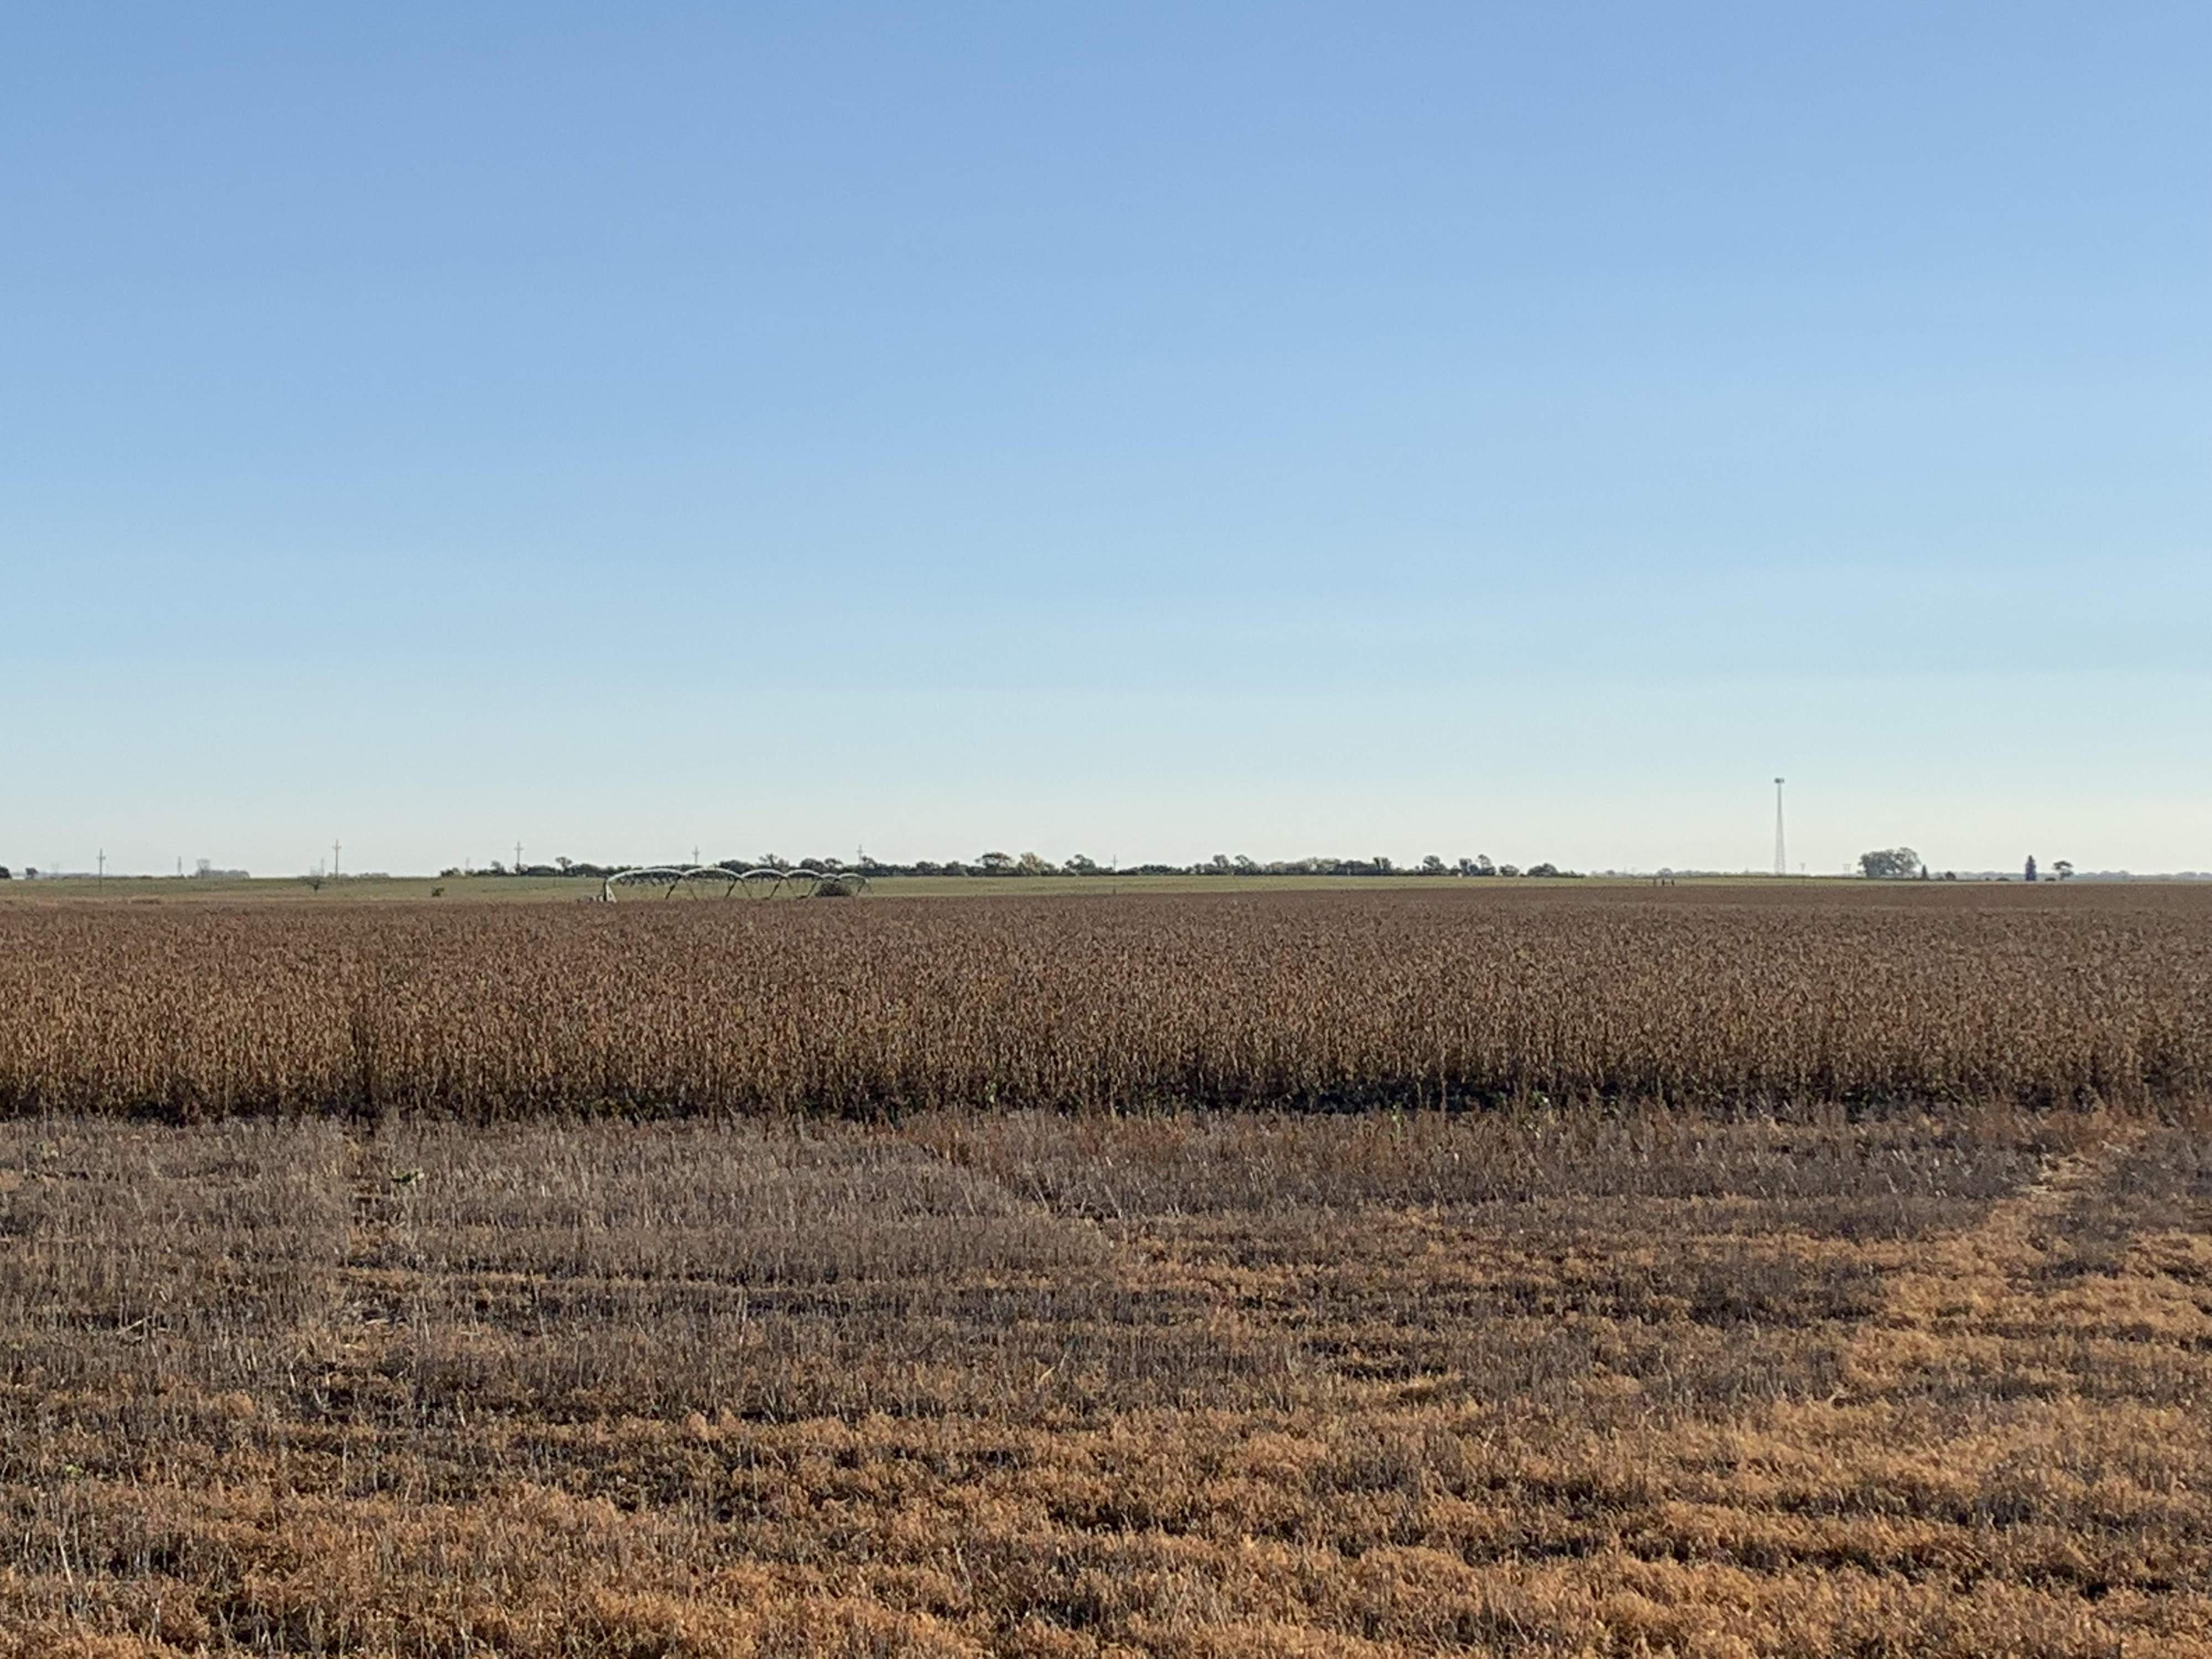 Morning Ag News, October 7, 2021: Soybean harvest is well underway in central North Dakota